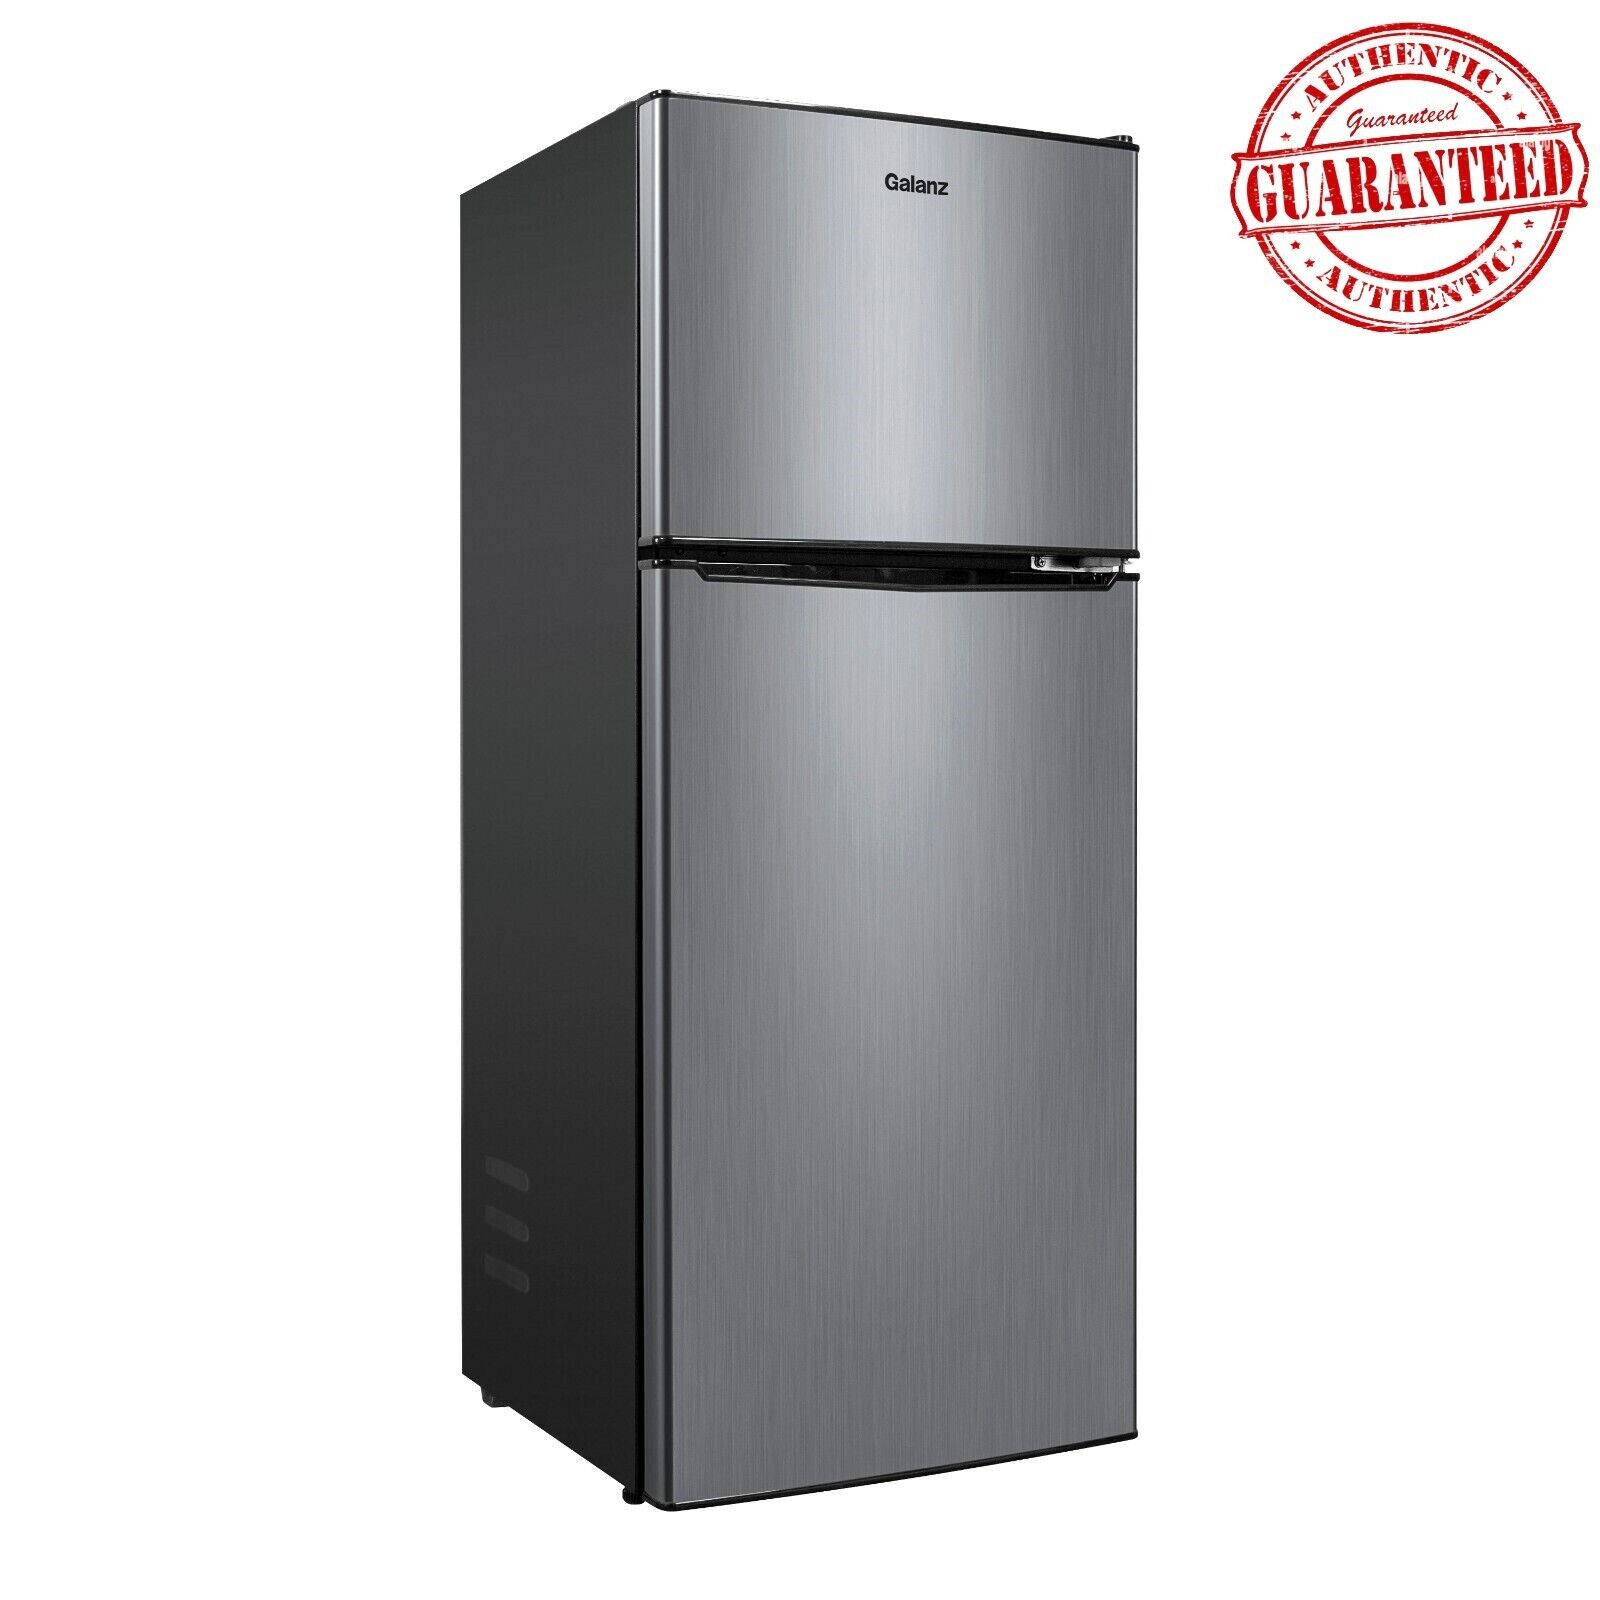 48" Galanz 4.6. Cu ft Two Door Mini Refrigerator with Freeze